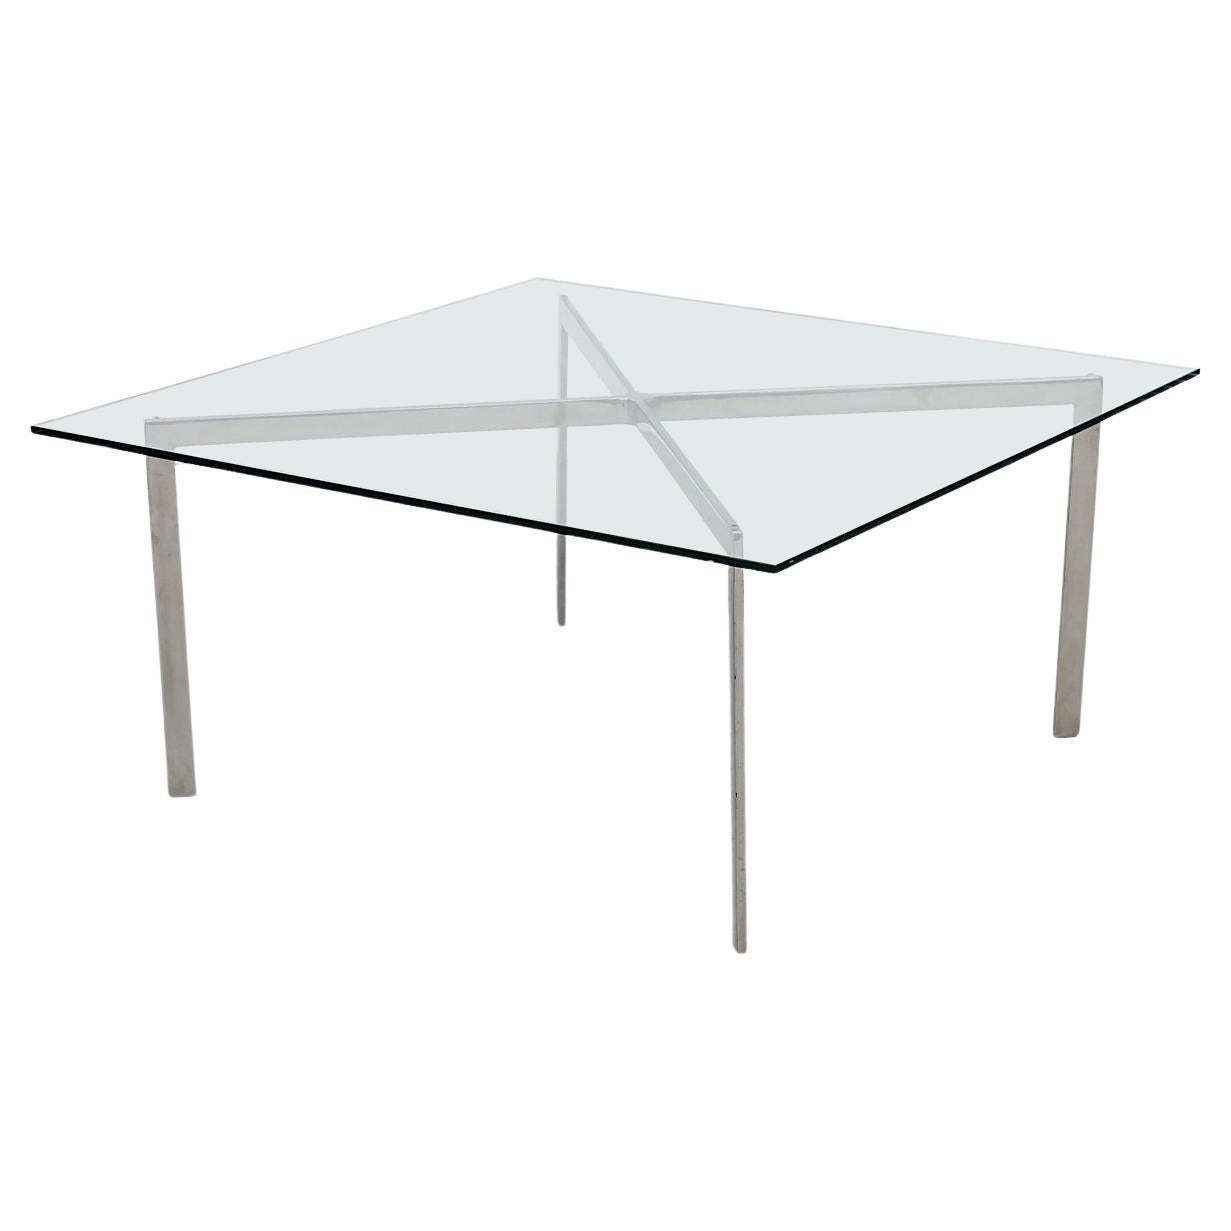 Ludwig Mies van der Rohe Attributed Chrome and Glass "Barcelona" Coffee Table For Sale